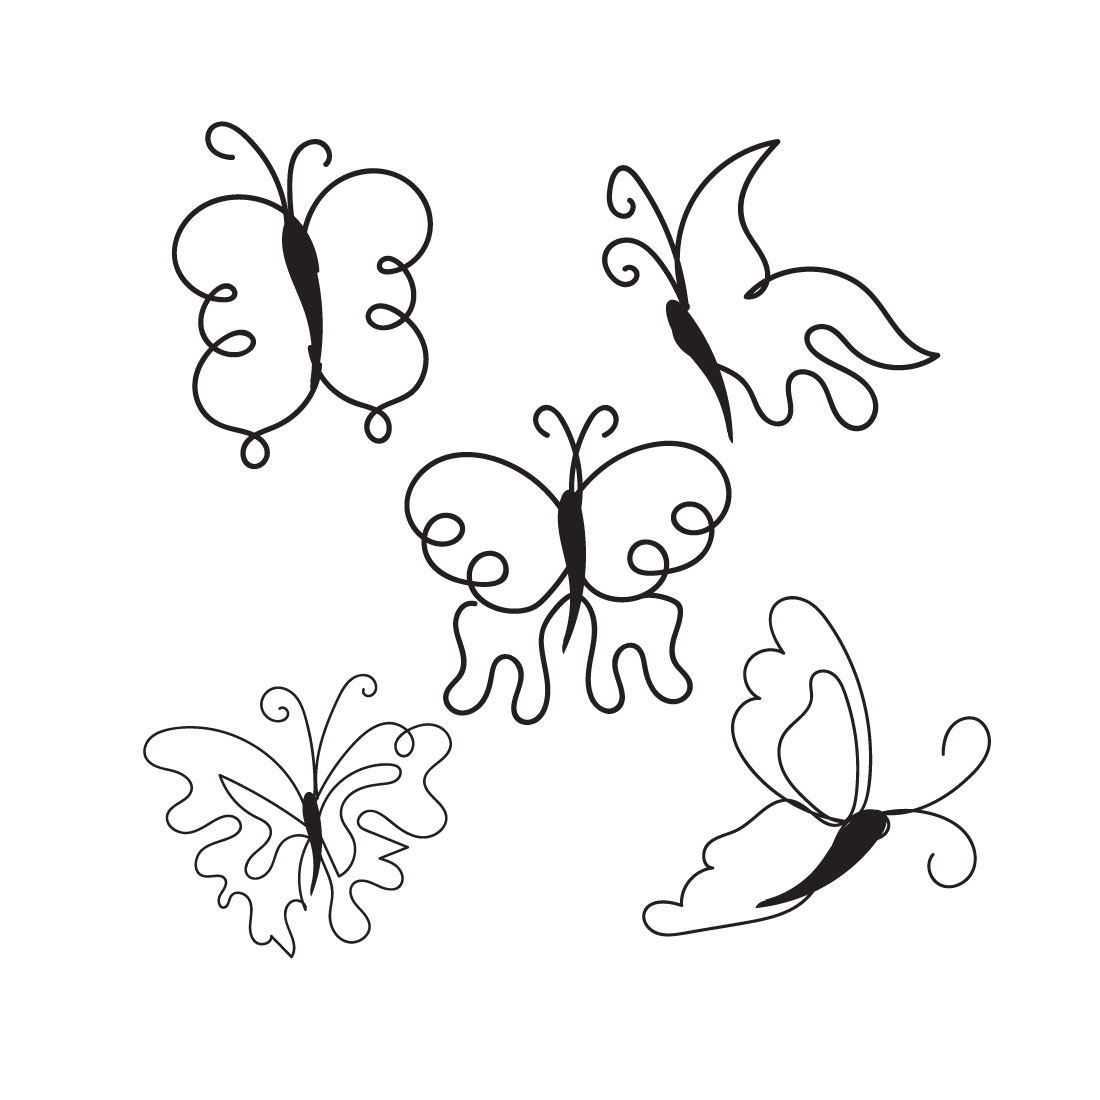 Drawing of four butterflies flying in the air.